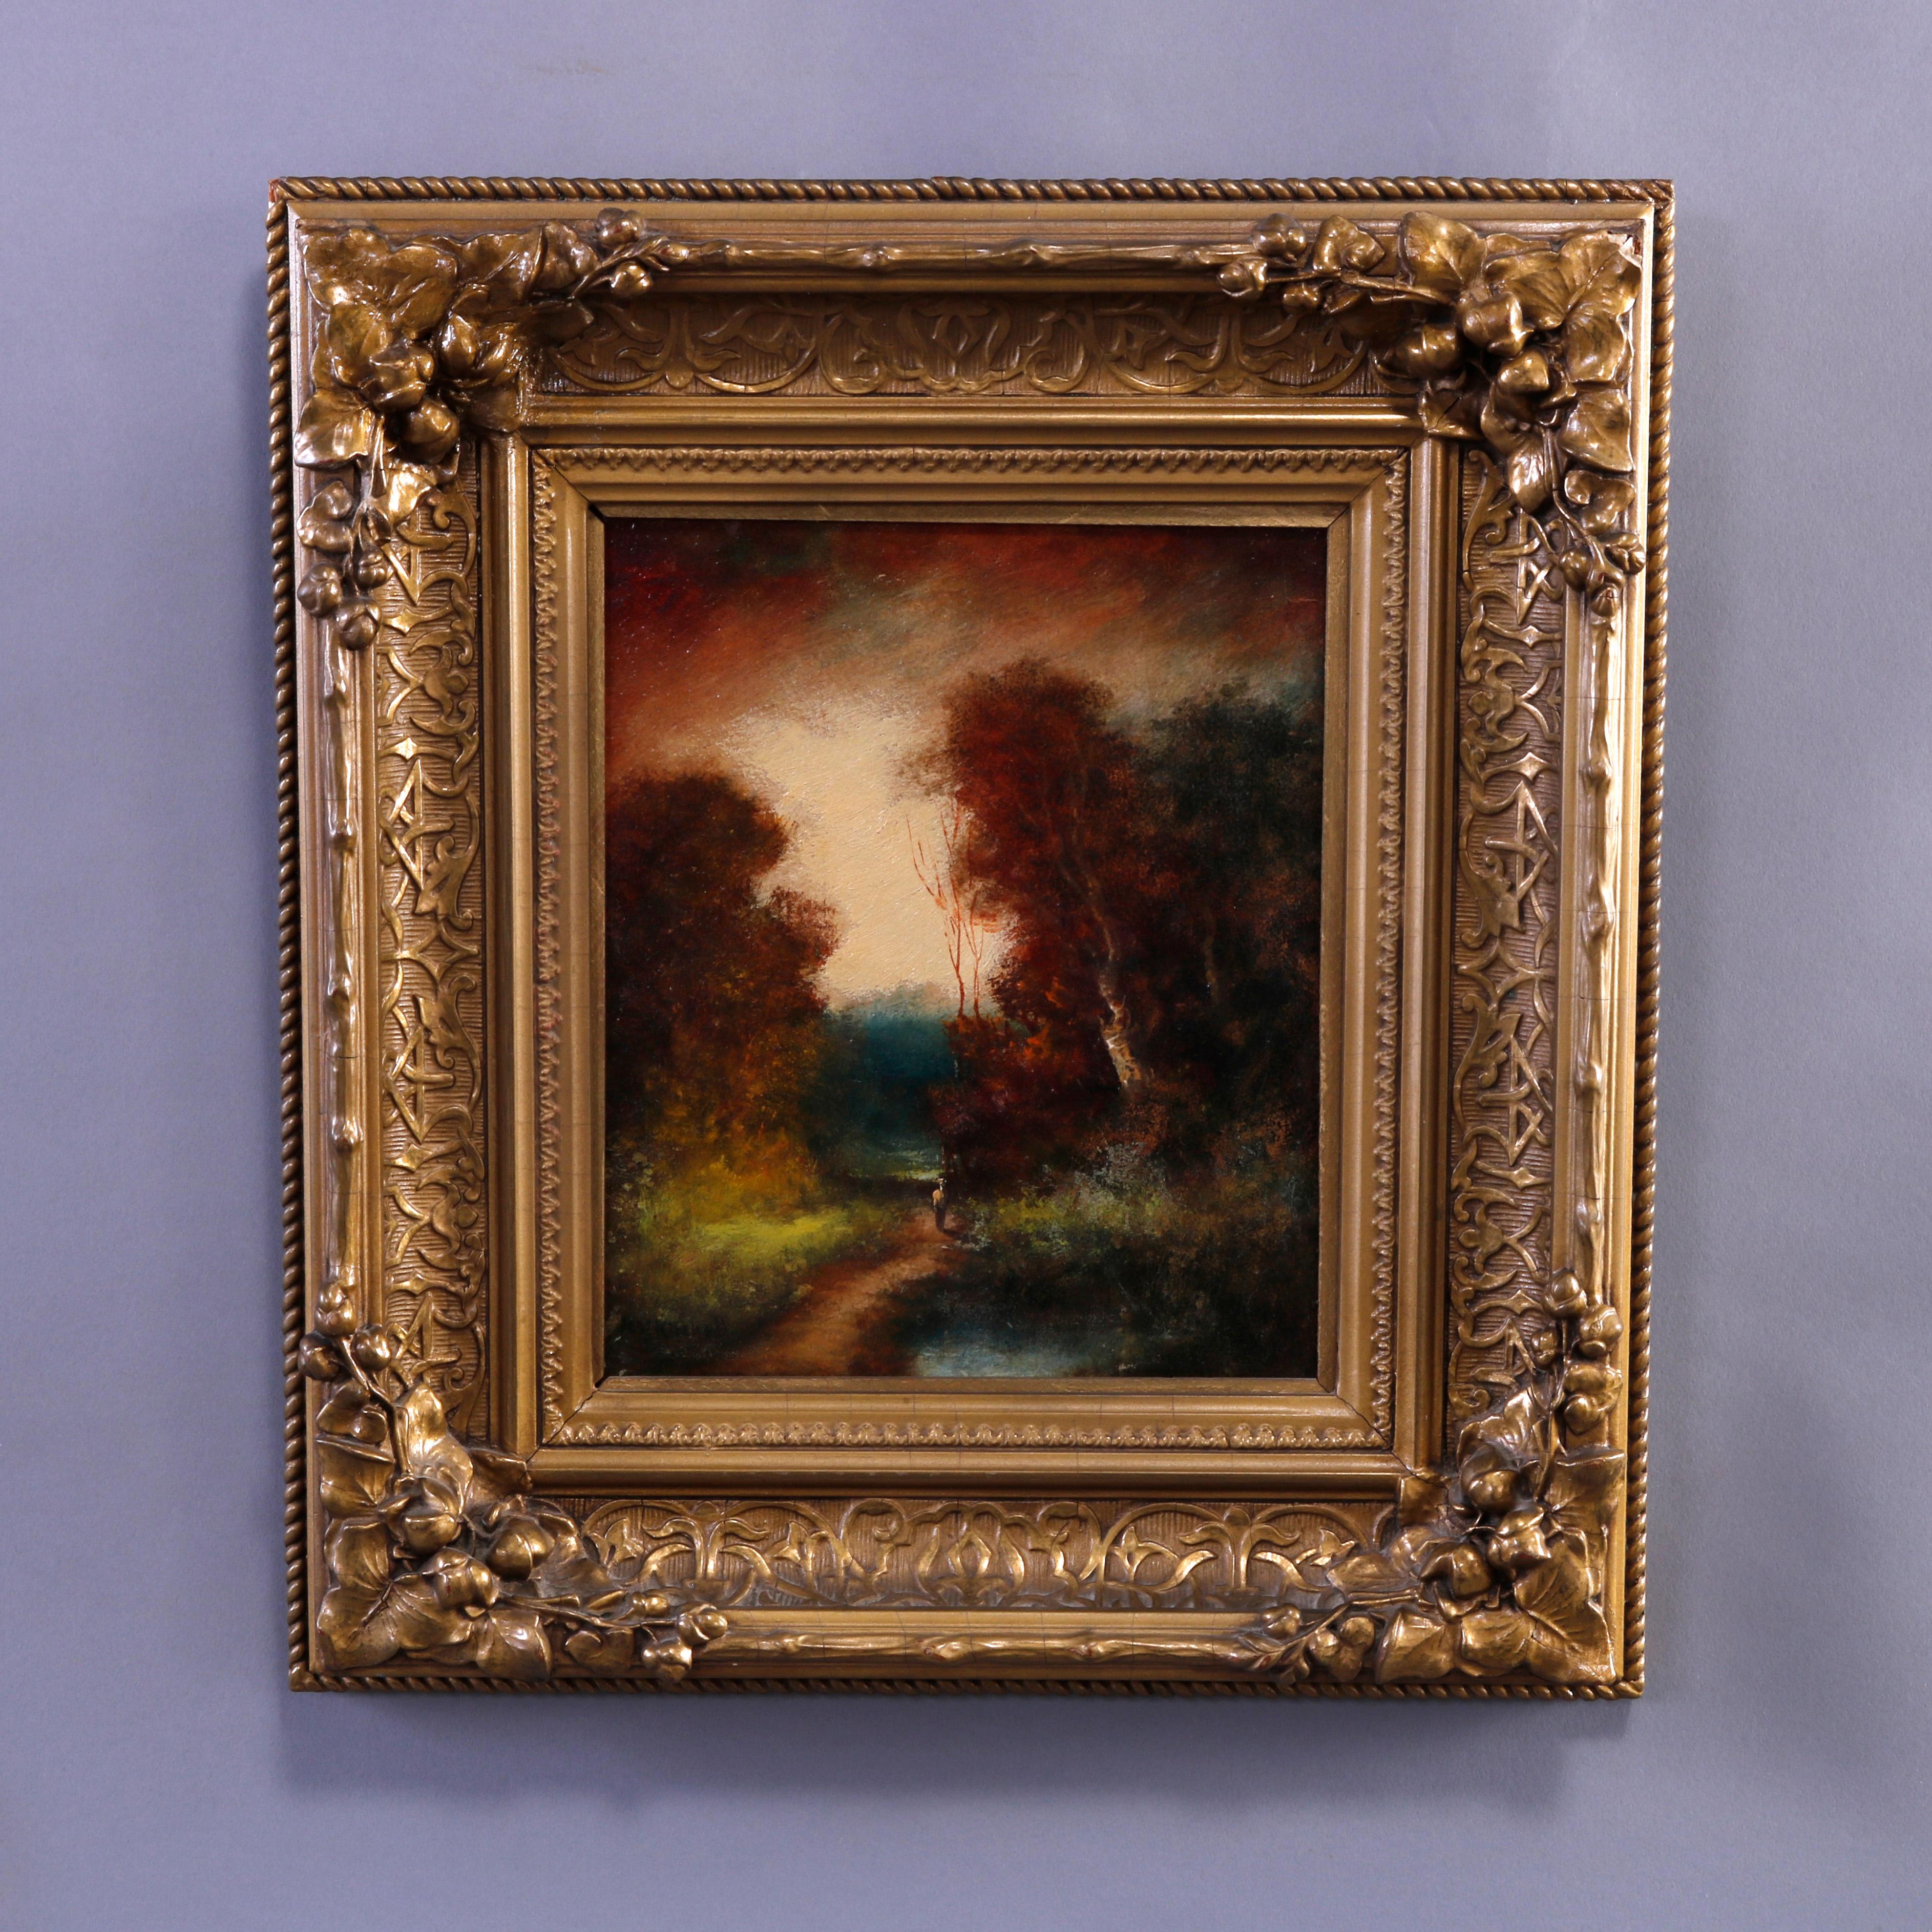 An antique painting by H.M. Kircher offers oil on board landscape scene of fall setting with stream, path and figure, artist signed lower left, seated in giltwood frame, c1890

Measures - 16.25''H x 14.75''W x 2.5''D.
  